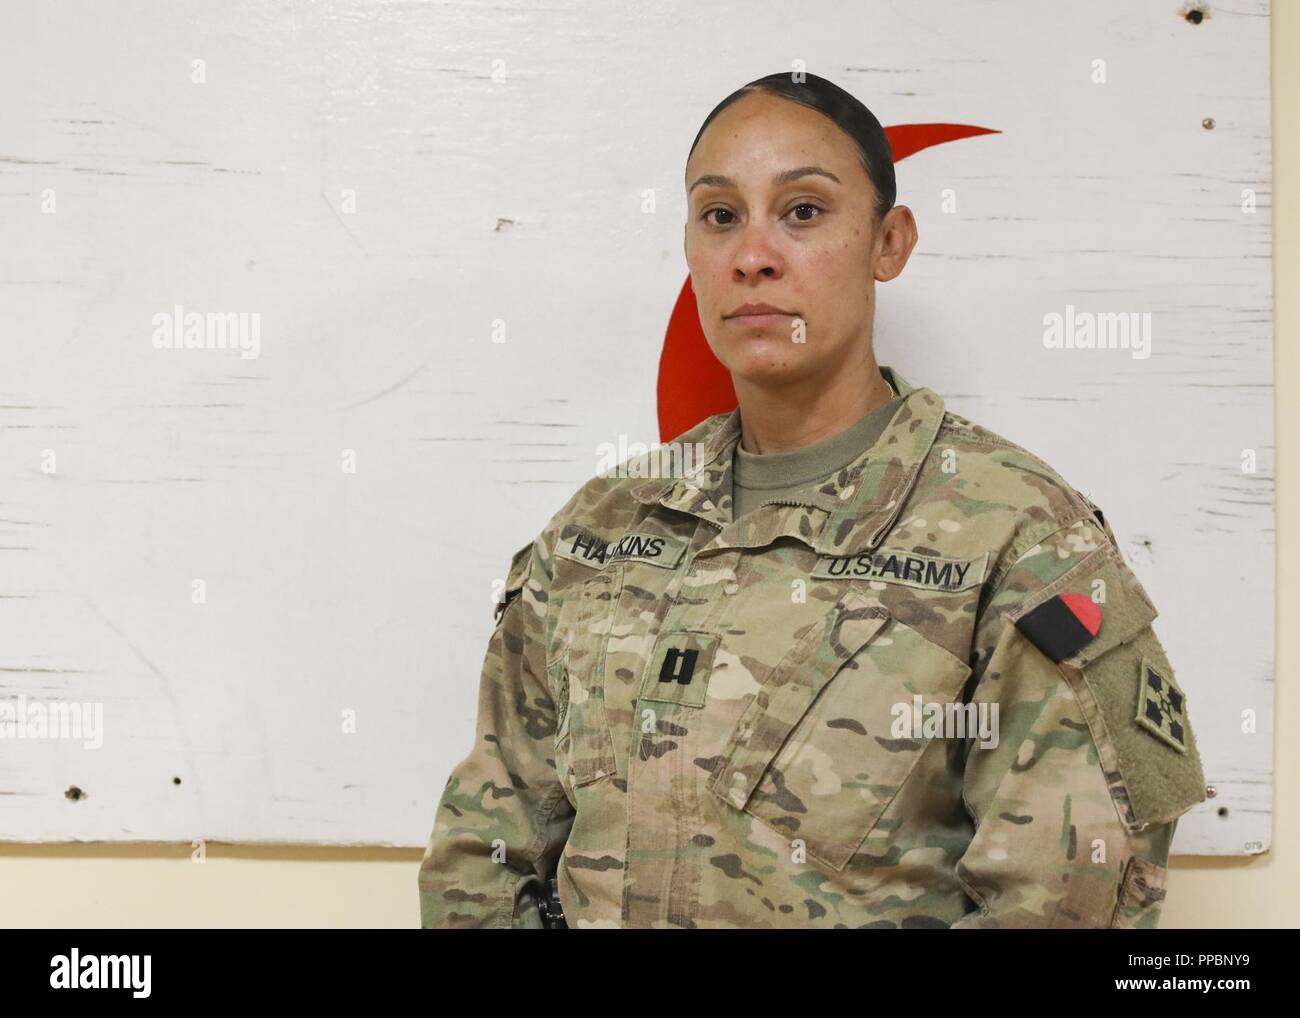 ANDAHAR, Afghanistan — Capt. Jennifer Hawkins, medical provider for 1st Battalion, 12th Infantry Regiment, 2nd Infantry Brigade Combat Team, 4th Infantry Division, served in the NCO corps from the rank of private to sergeant first class before commissioning. ( Stock Photo